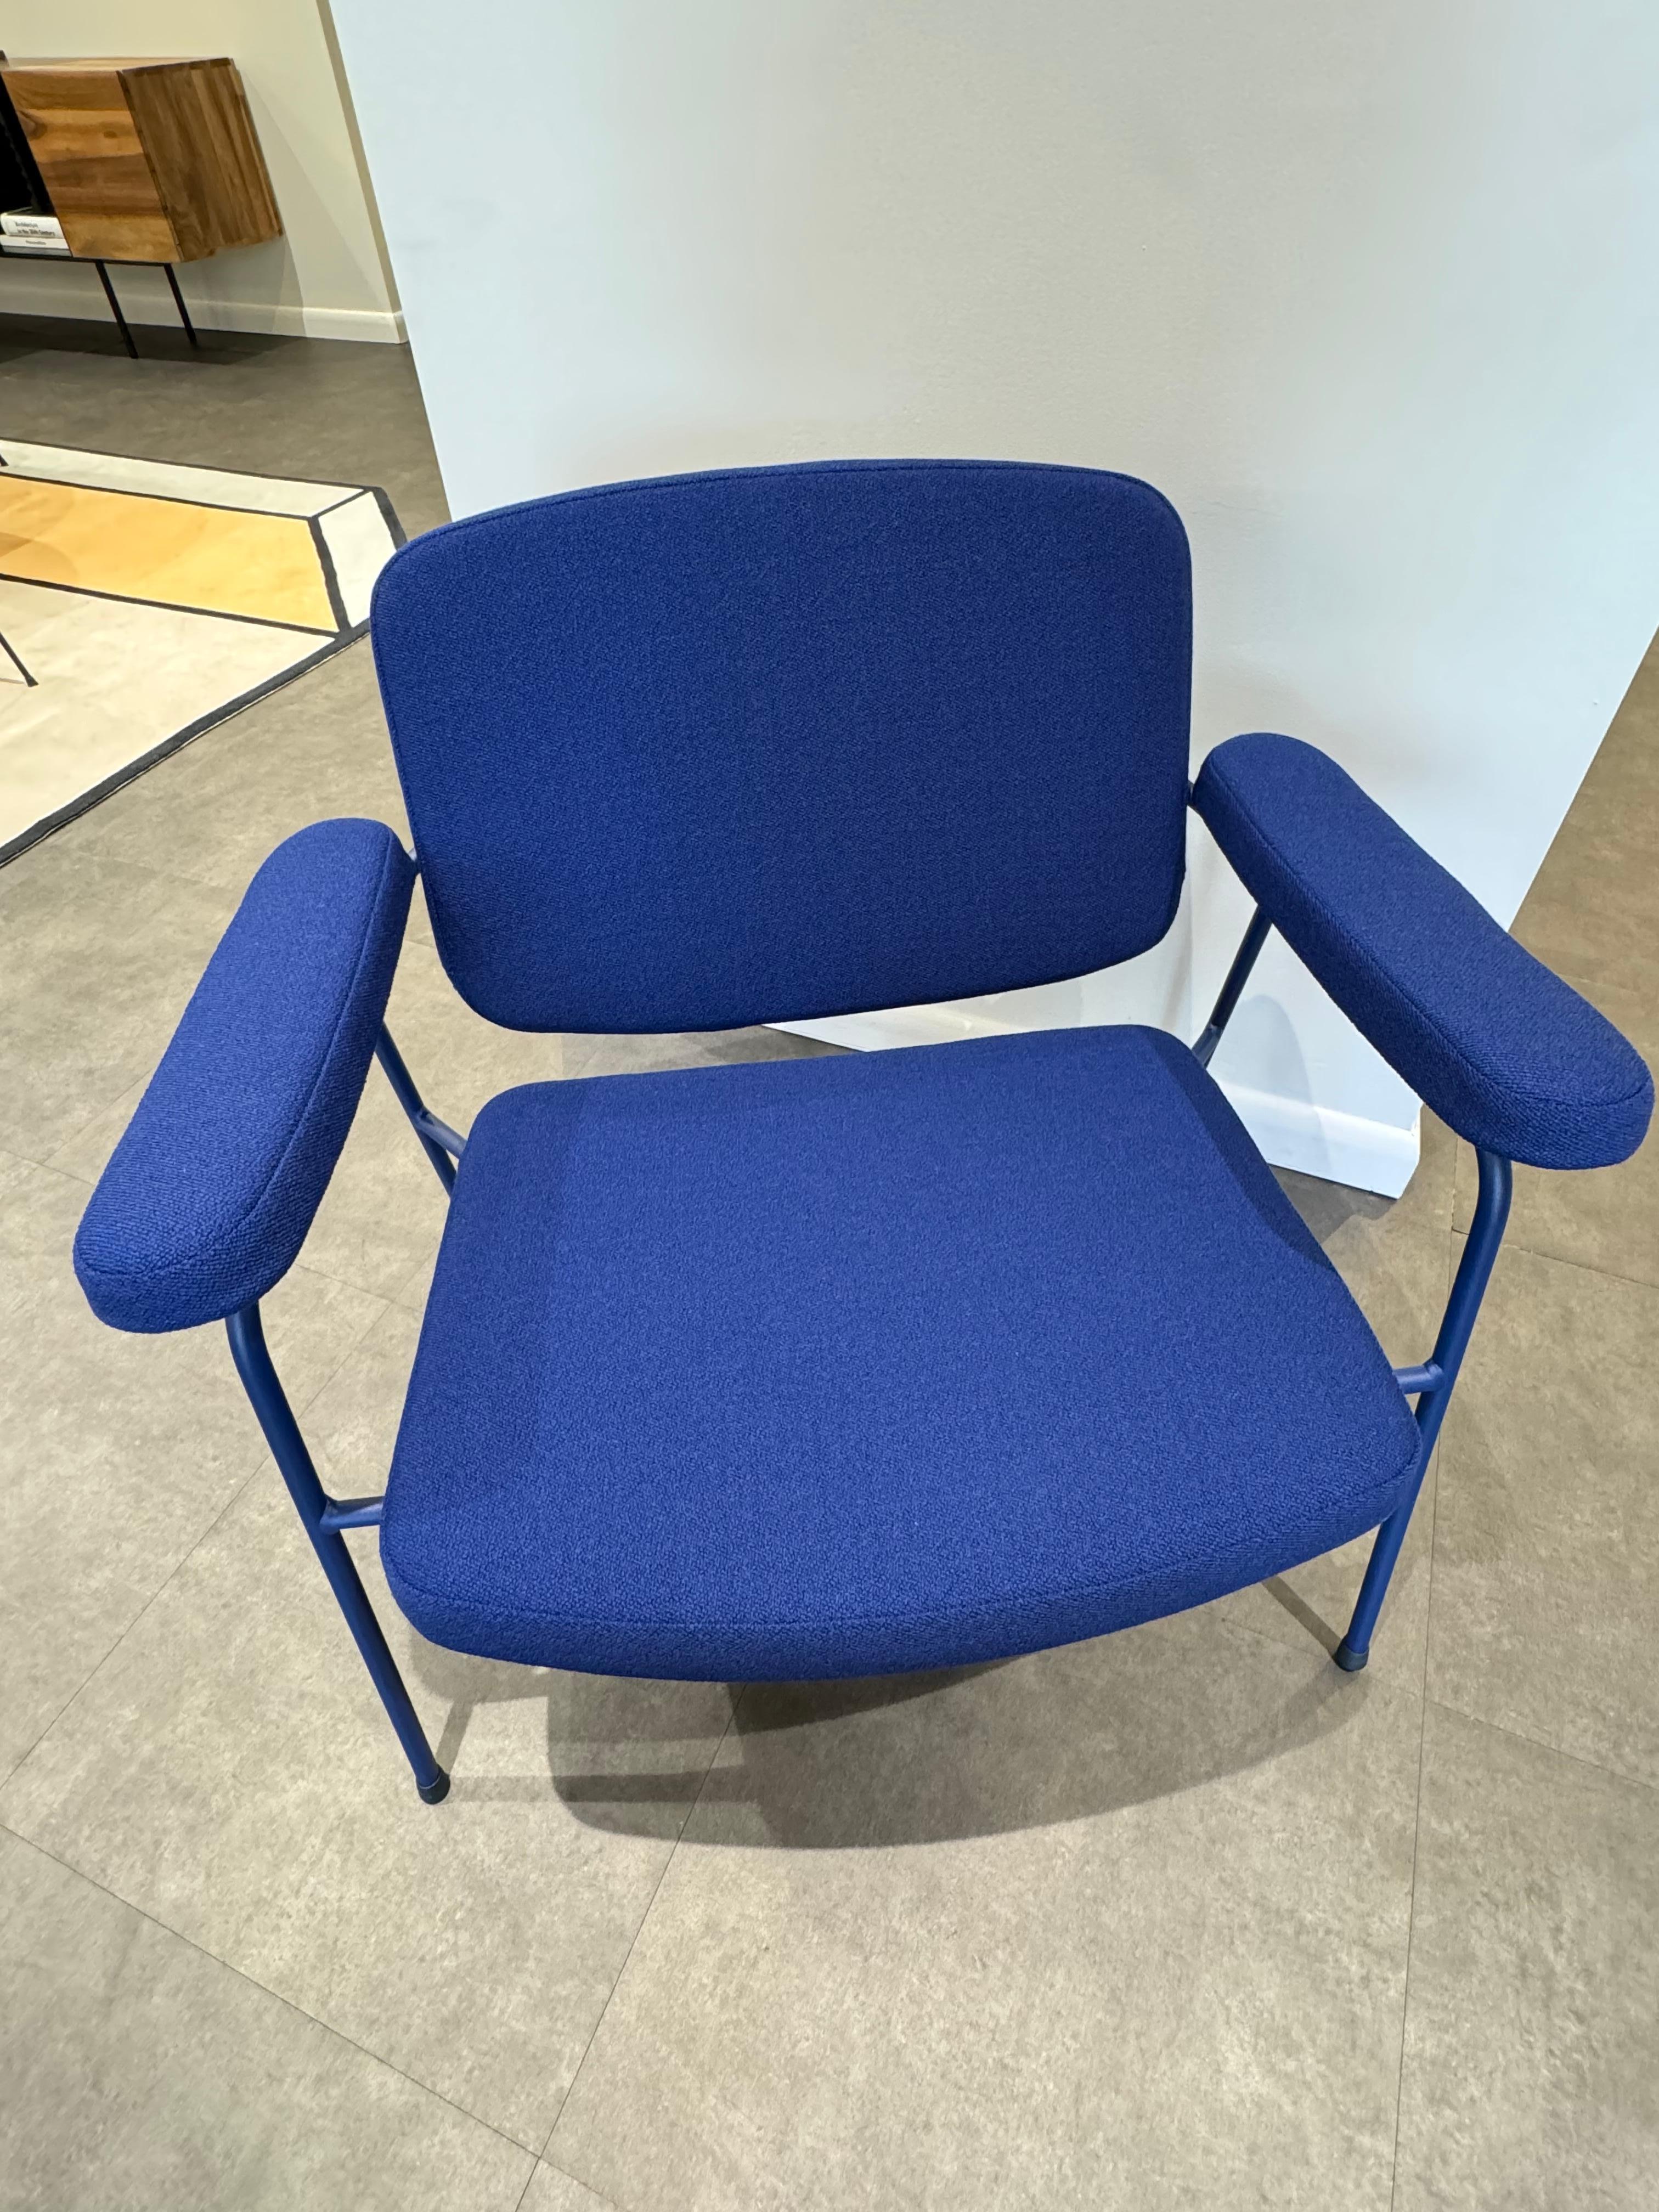 Upholstery Fabric not standard(name
fabric/colour/supplier) Vidar by
Kvadrat color 0772 (GG)

Moulin Lounge
Design by Pierre Paulin
The 1958 Moulin chair family were some of Paulin's first commercial pieces exploring Mid-Century Modern aesthetics.